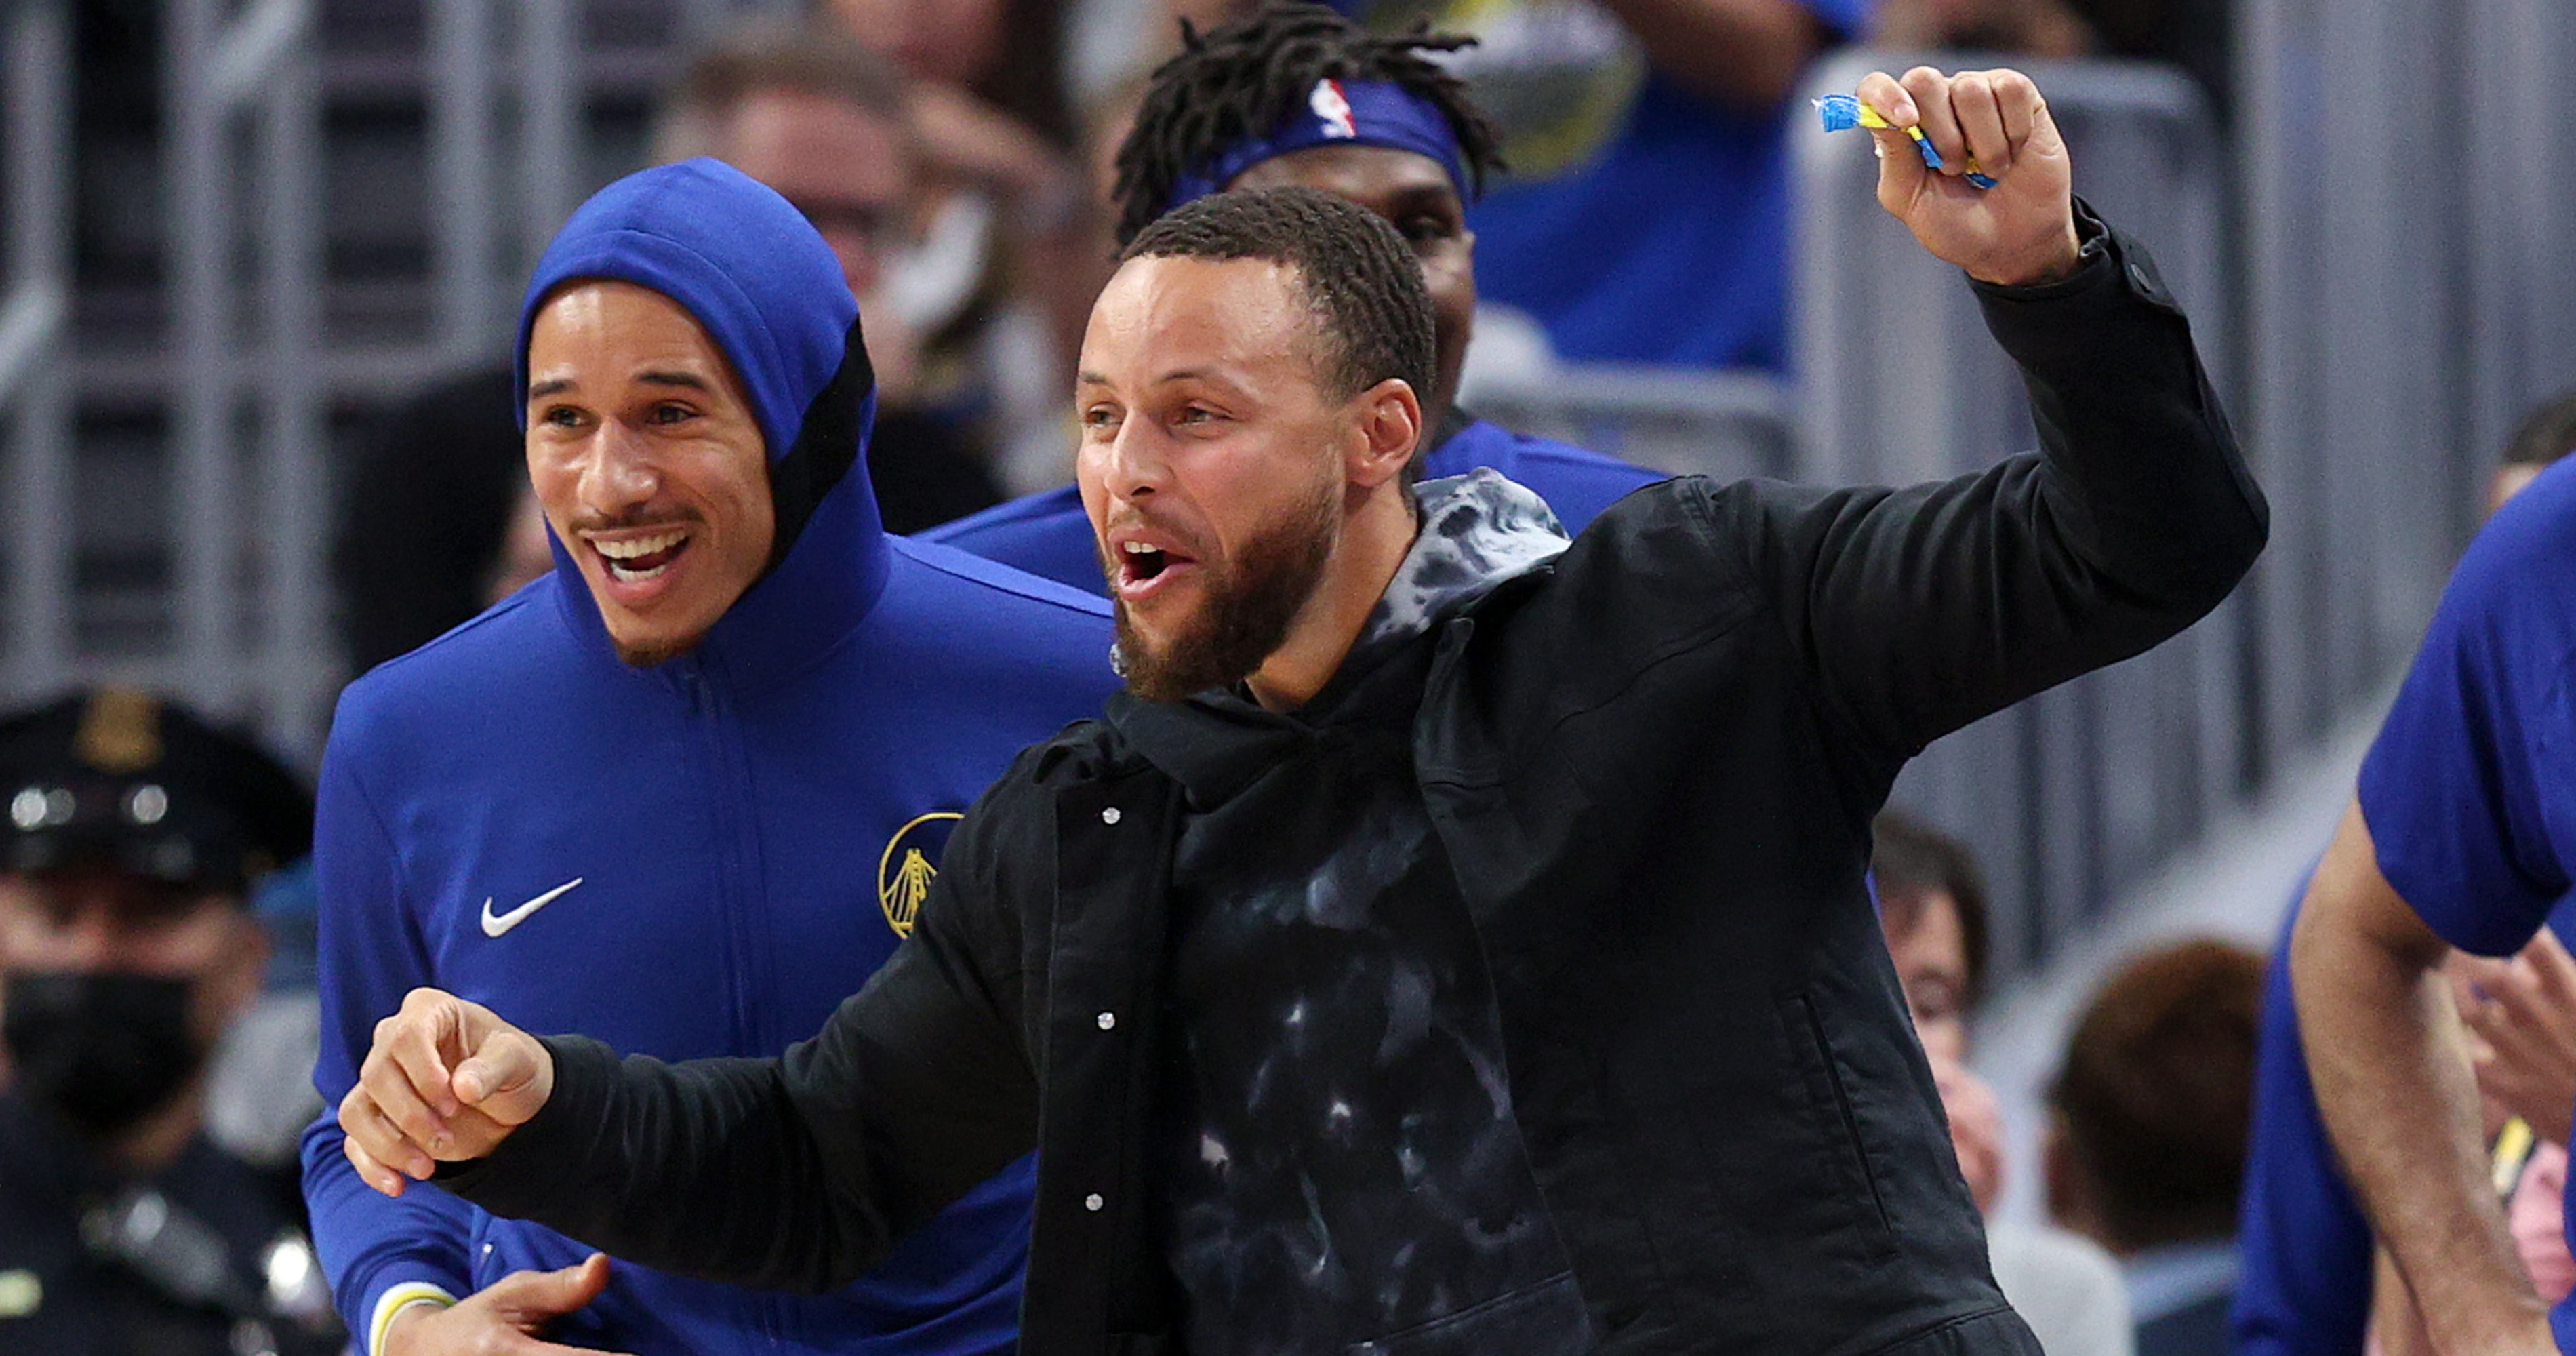 LeBron James “Had His Chance” to Miraculously Join Stephen Curry's Warriors,  But Had Himself to Blame in 2014 - EssentiallySports